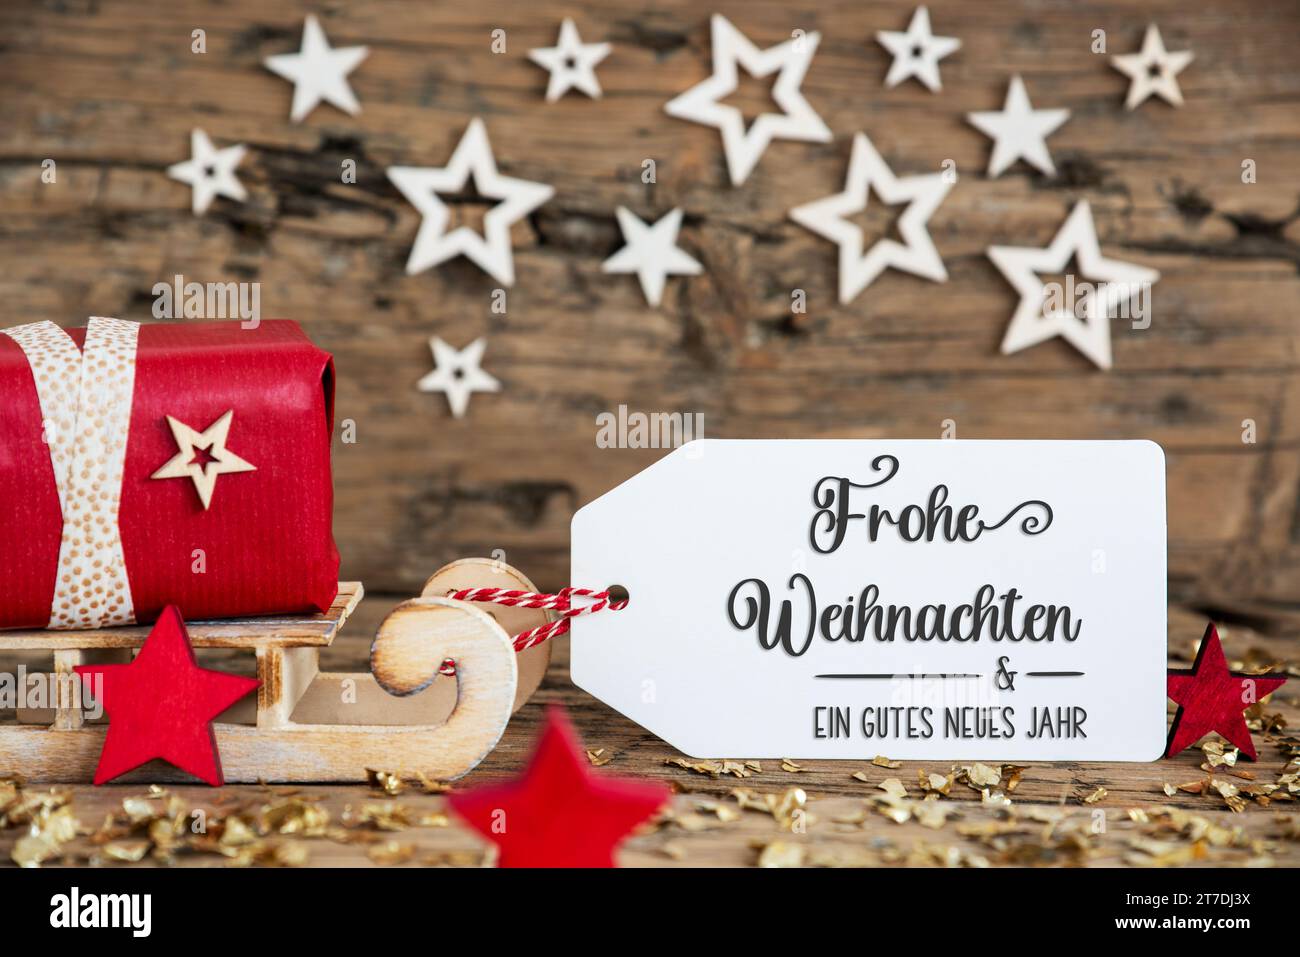 Wooden Sled With Red Gift And Rustic Christmas Background With Label With German Text Frohe Weihnachten Und Ein Gutes Neues Jahr, Which Means Merry Ch Stock Photo